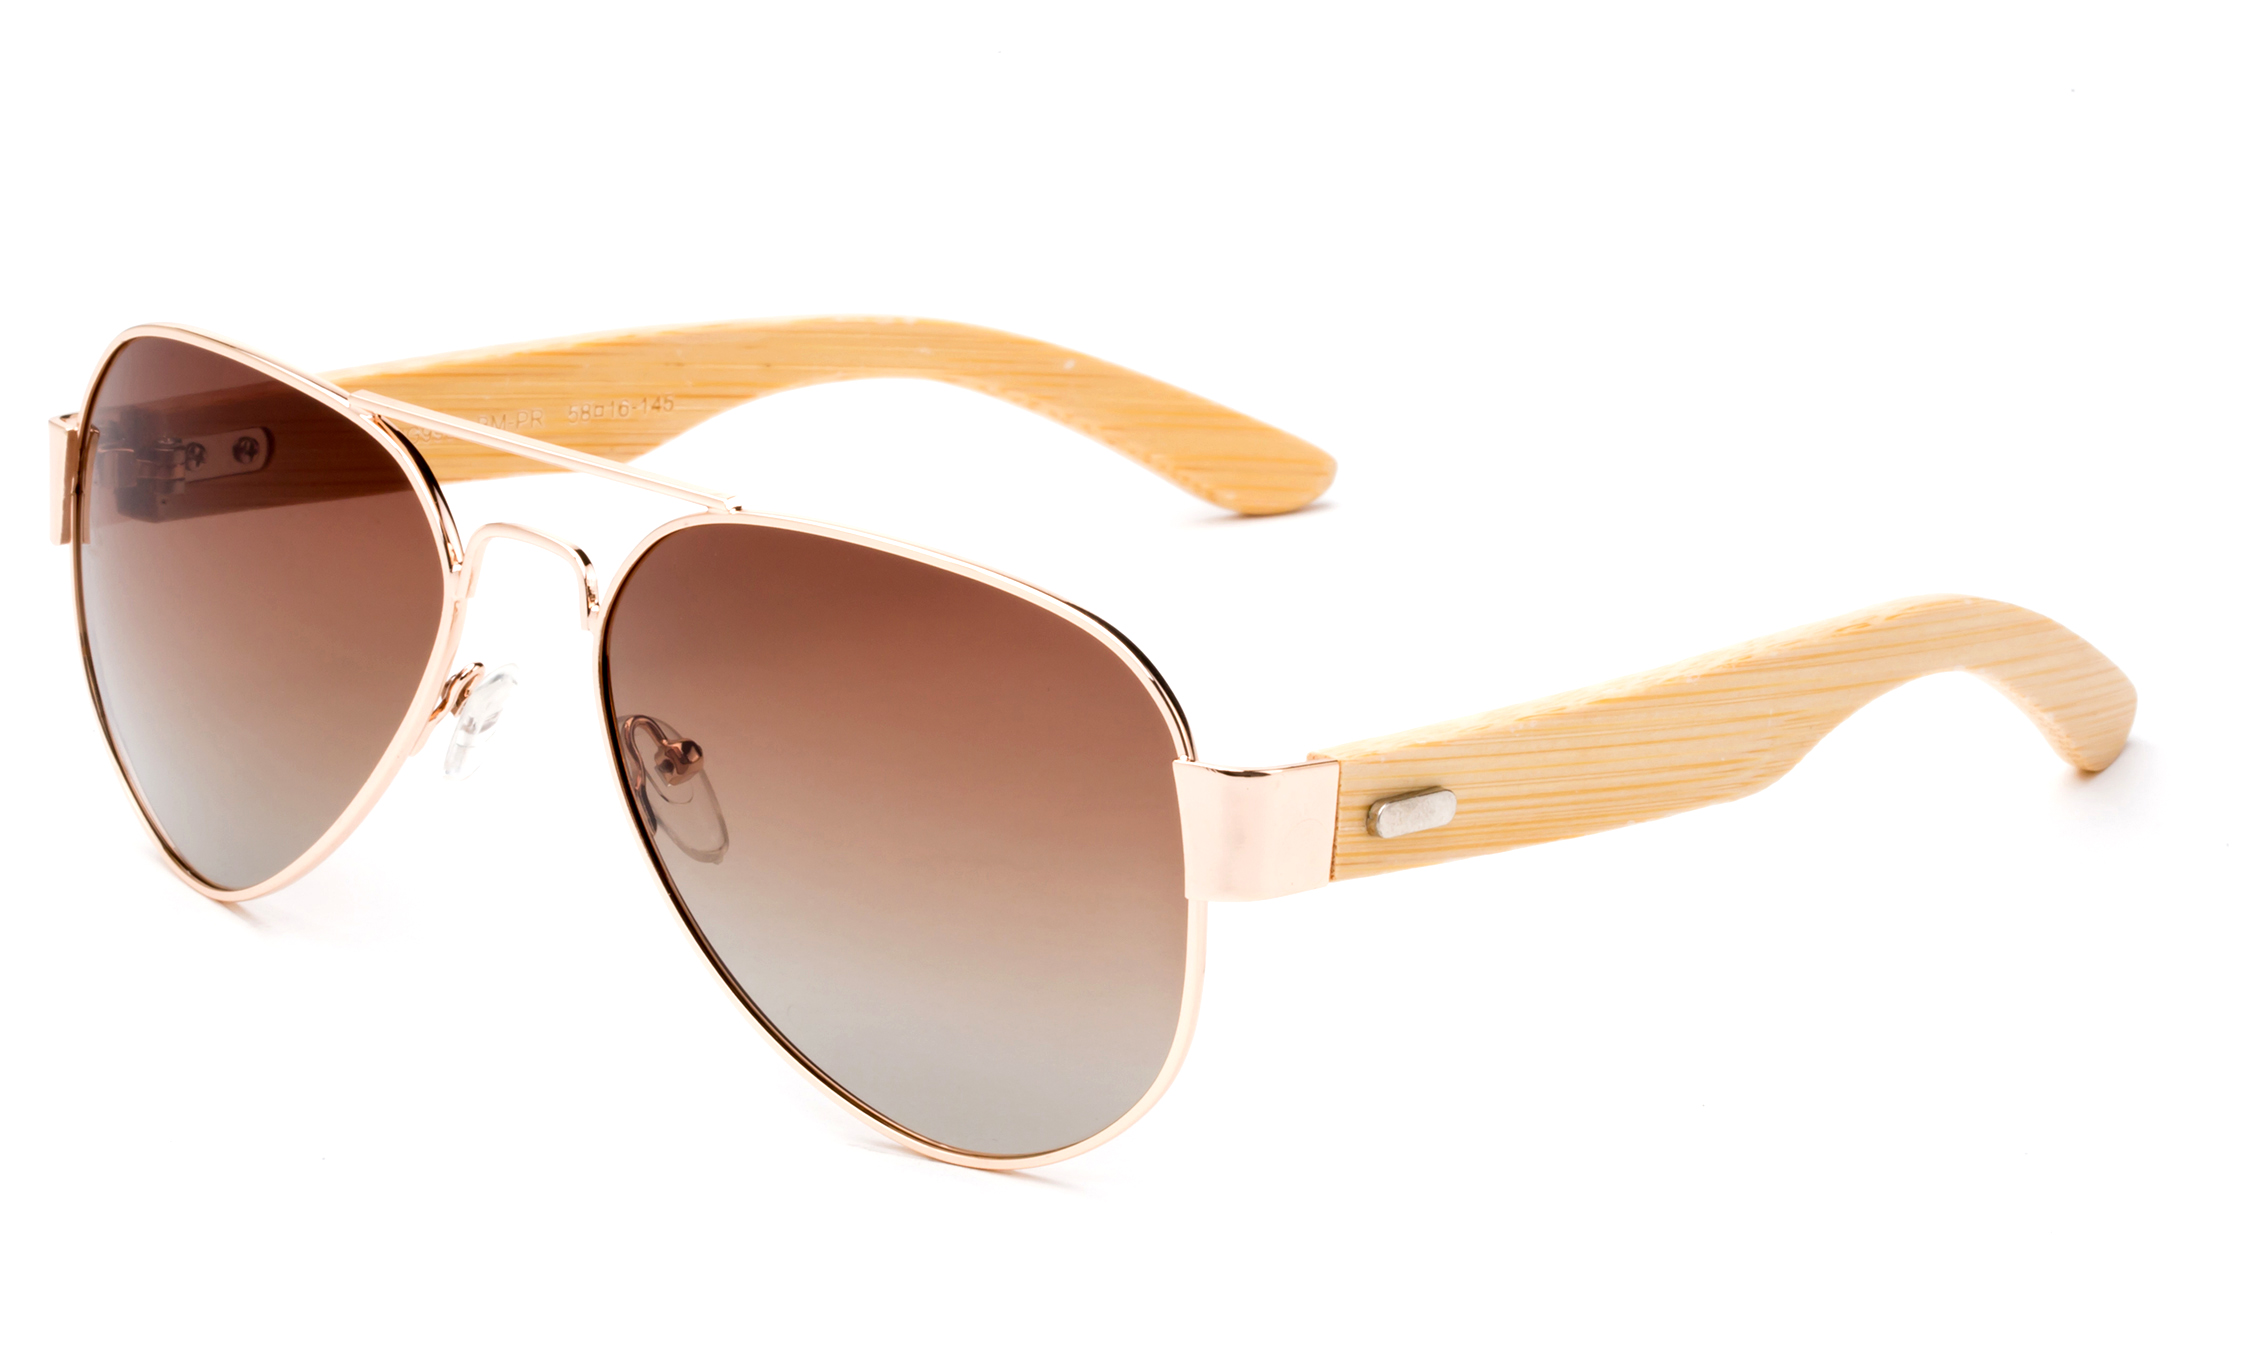 High Qaulity Polarized Sunglasses with Real Bamboo Arm Aviator Sunglasses Bamboo Sunglasses for Men & Women - image 2 of 2